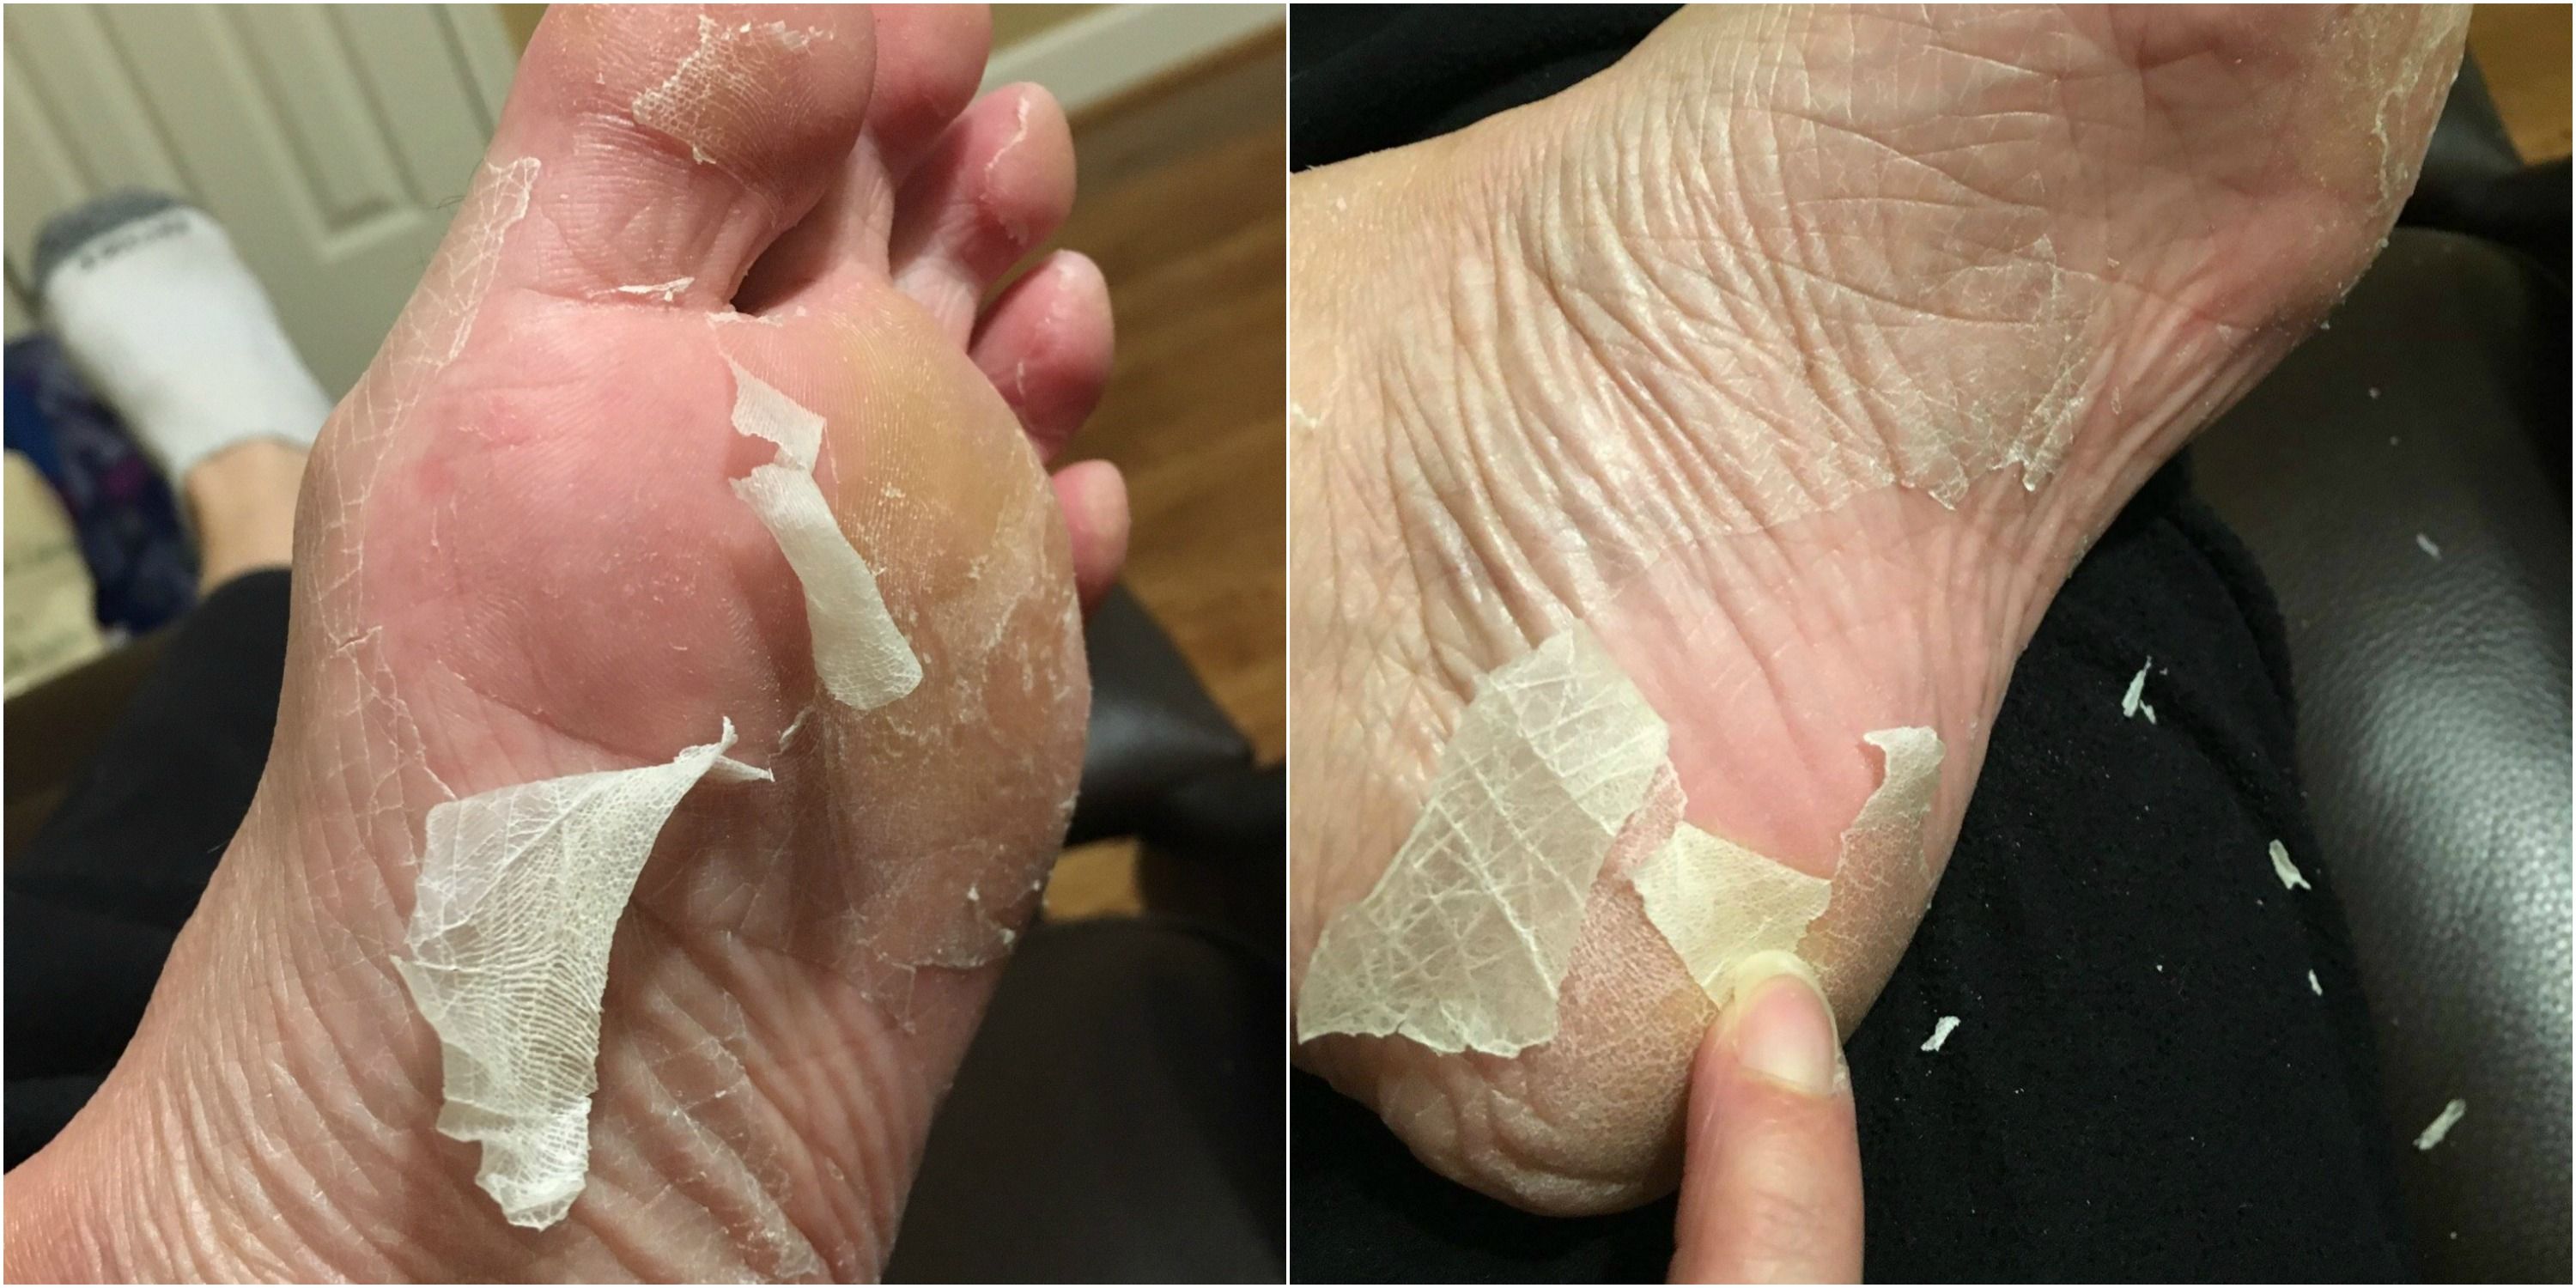 Baby Foot Peel Review - What Know About Baby Foot Peel and If It's Safe